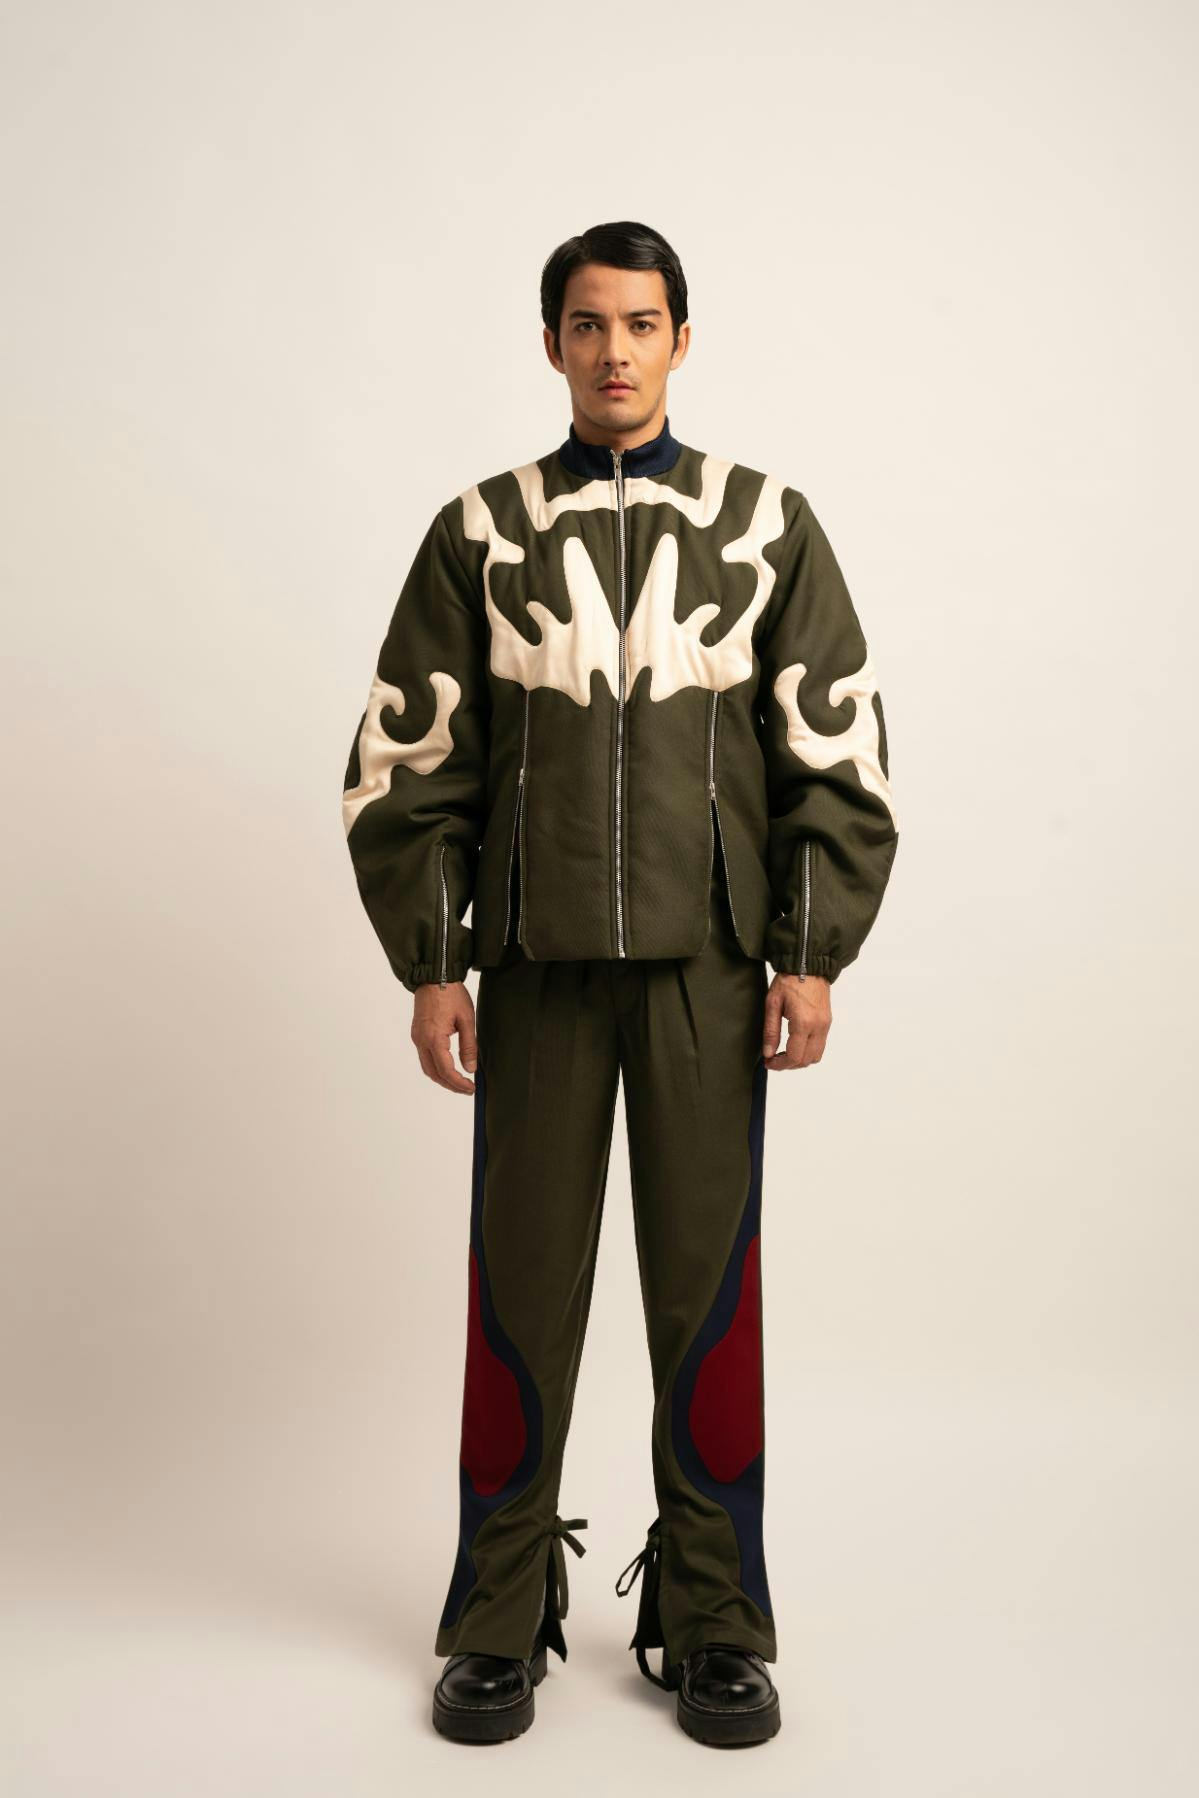 The Nebula Bomber Jacket, a product by Siddhant Agrawal Label